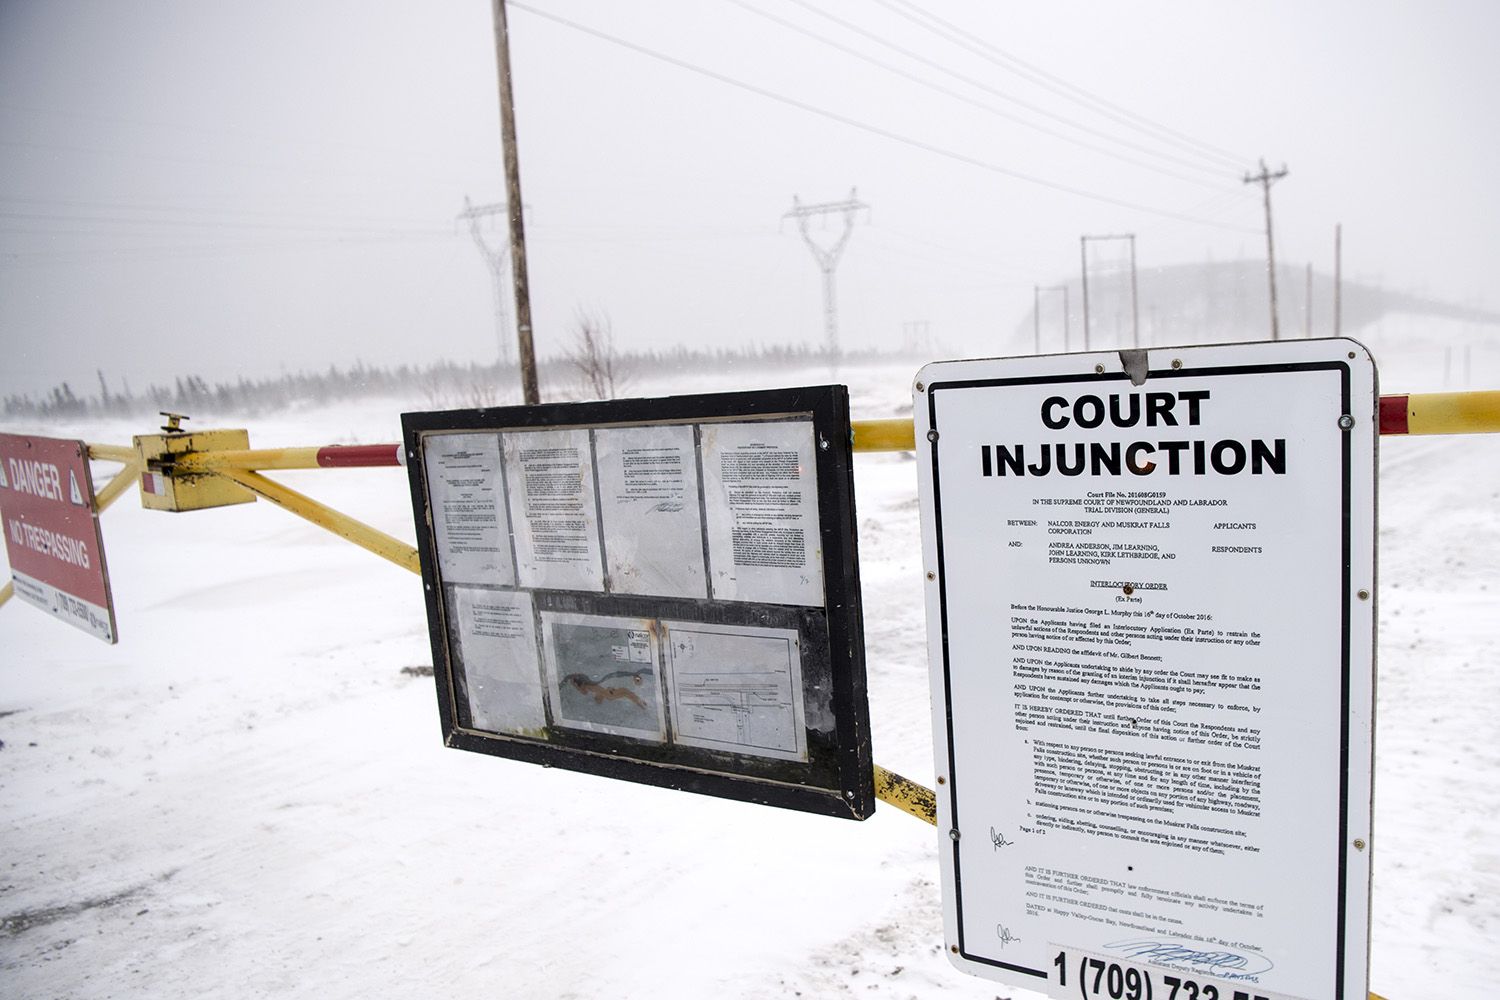 Signs warn protesters at the gate to Muskrat Falls Generating Facility, the site where Learning and Davis were arrested, on Nov. 16, 2019. Image by Michael G. Seamans. Canada, 2019.